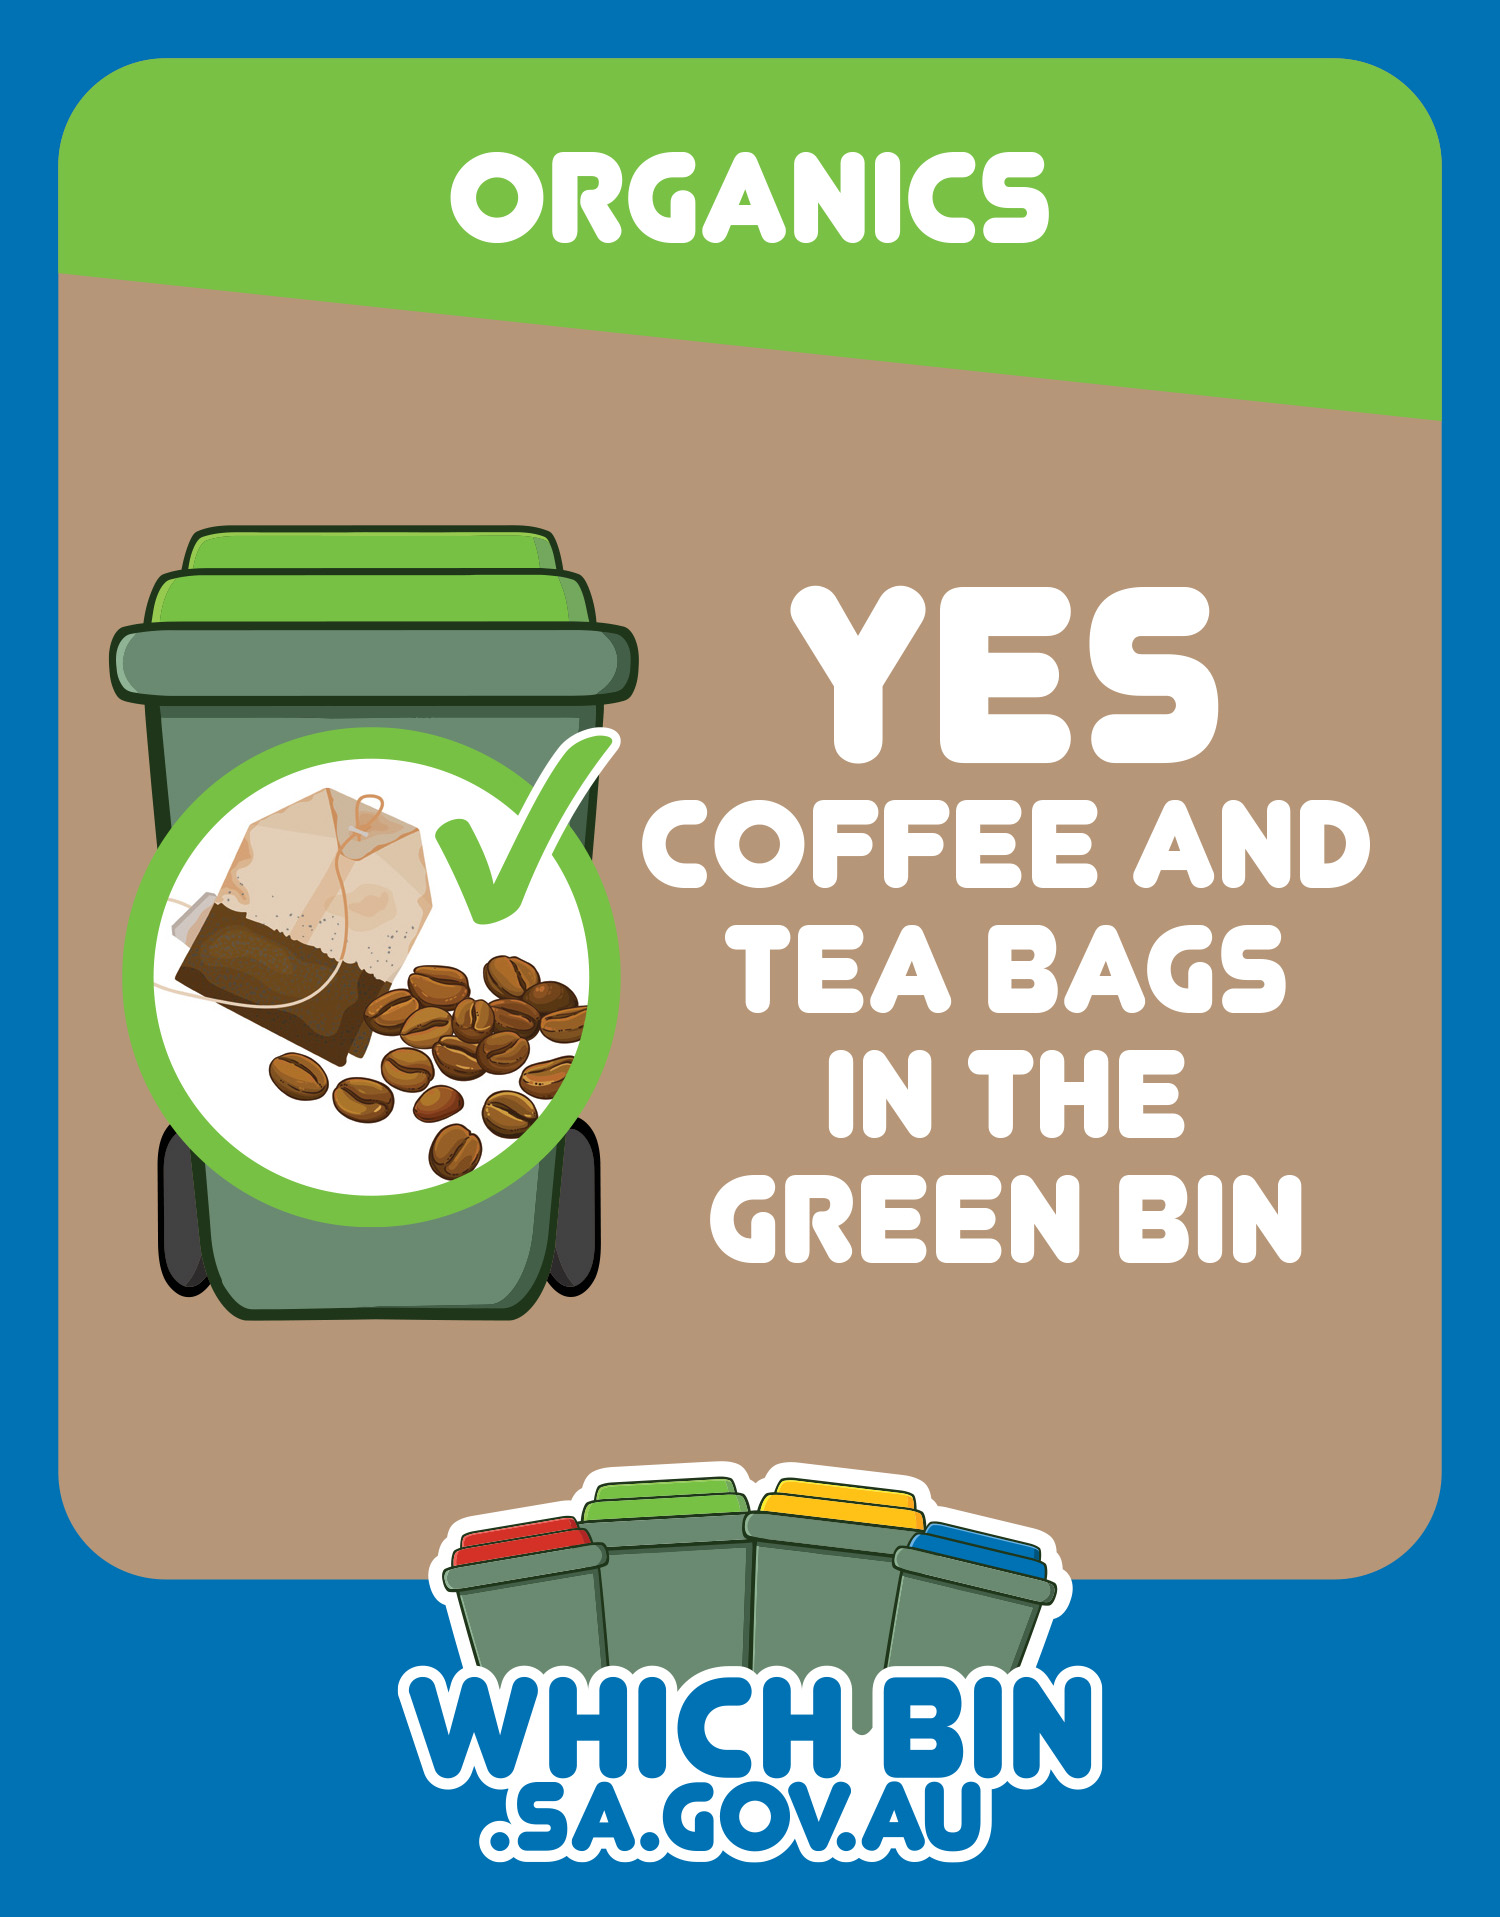 Coffee grounds, tea bags and leaves go in the green bin